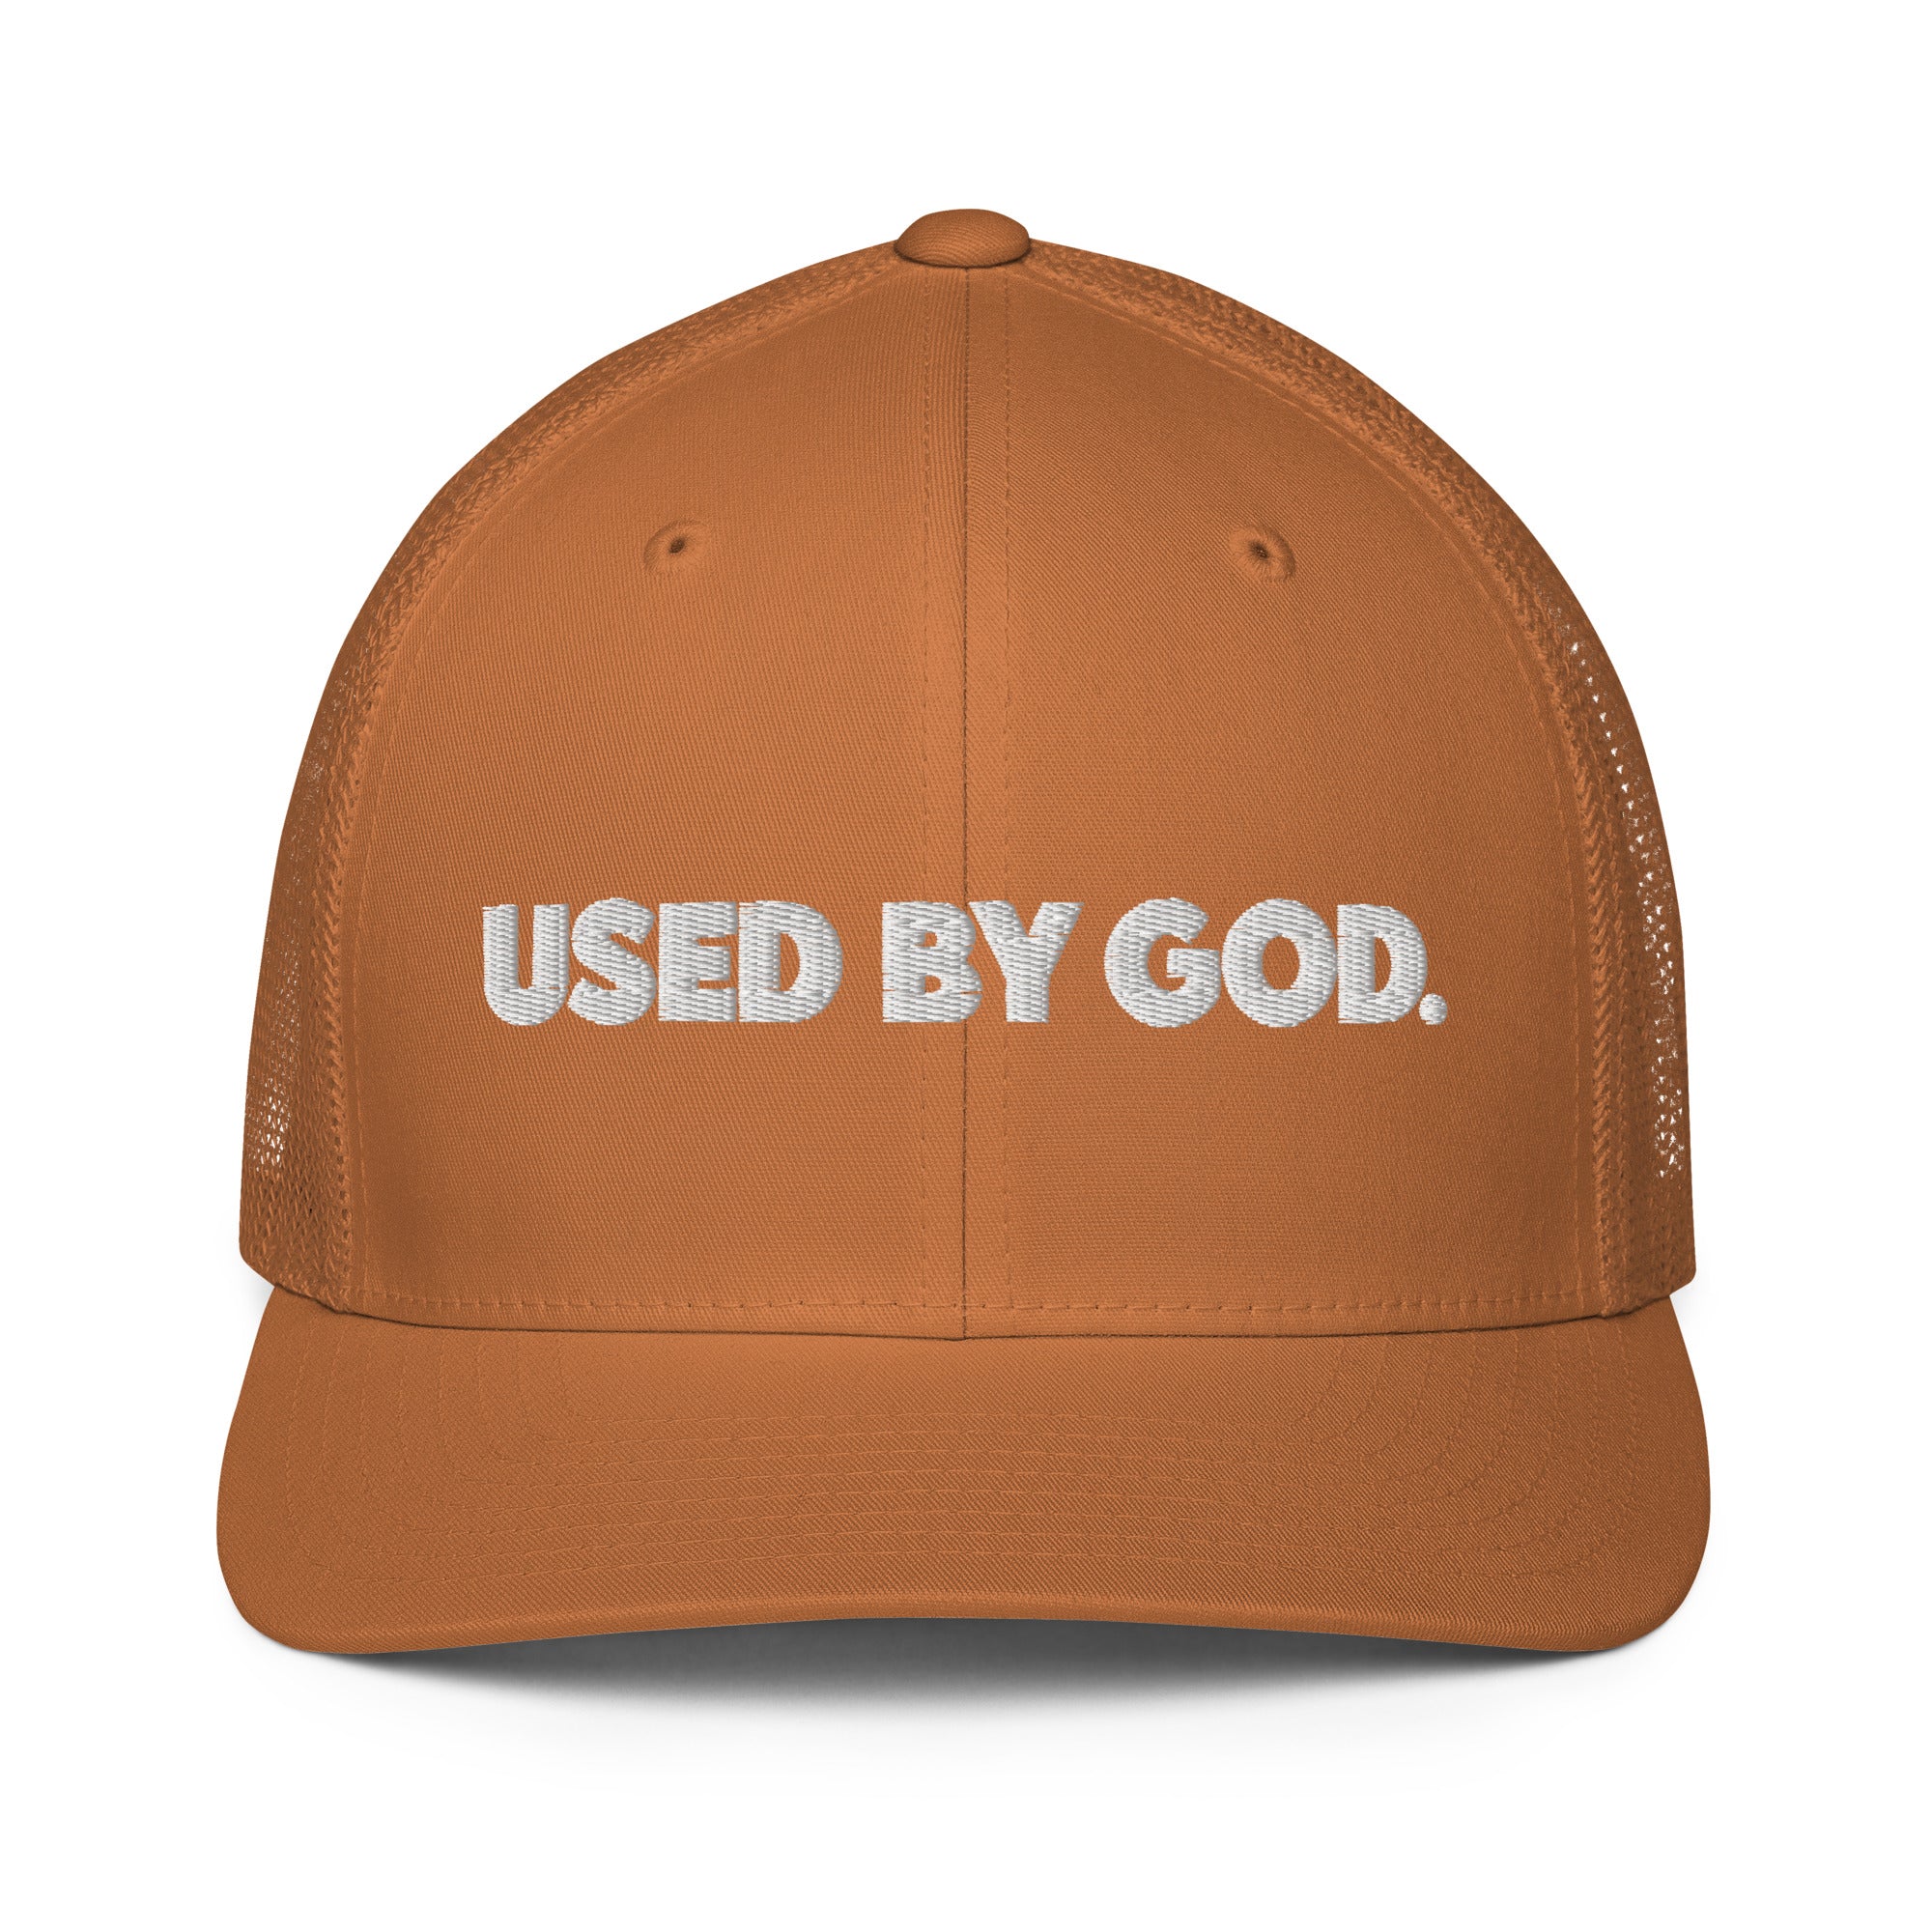 UBG Camel Trucker Cap, Used By God, Used By God Clothing, Christian Apparel, Christian Hats, Christian T-Shirts, Christian Clothing, God Shirts, Christian Sweatshirts, God Clothing, Jesus Hoodie, Jesus Clothes, God Is Dope, Art Of Homage, Red Letter Clothing, Elevated Faith, Active Faith Sports, Beacon Threads, God The Father Apparel